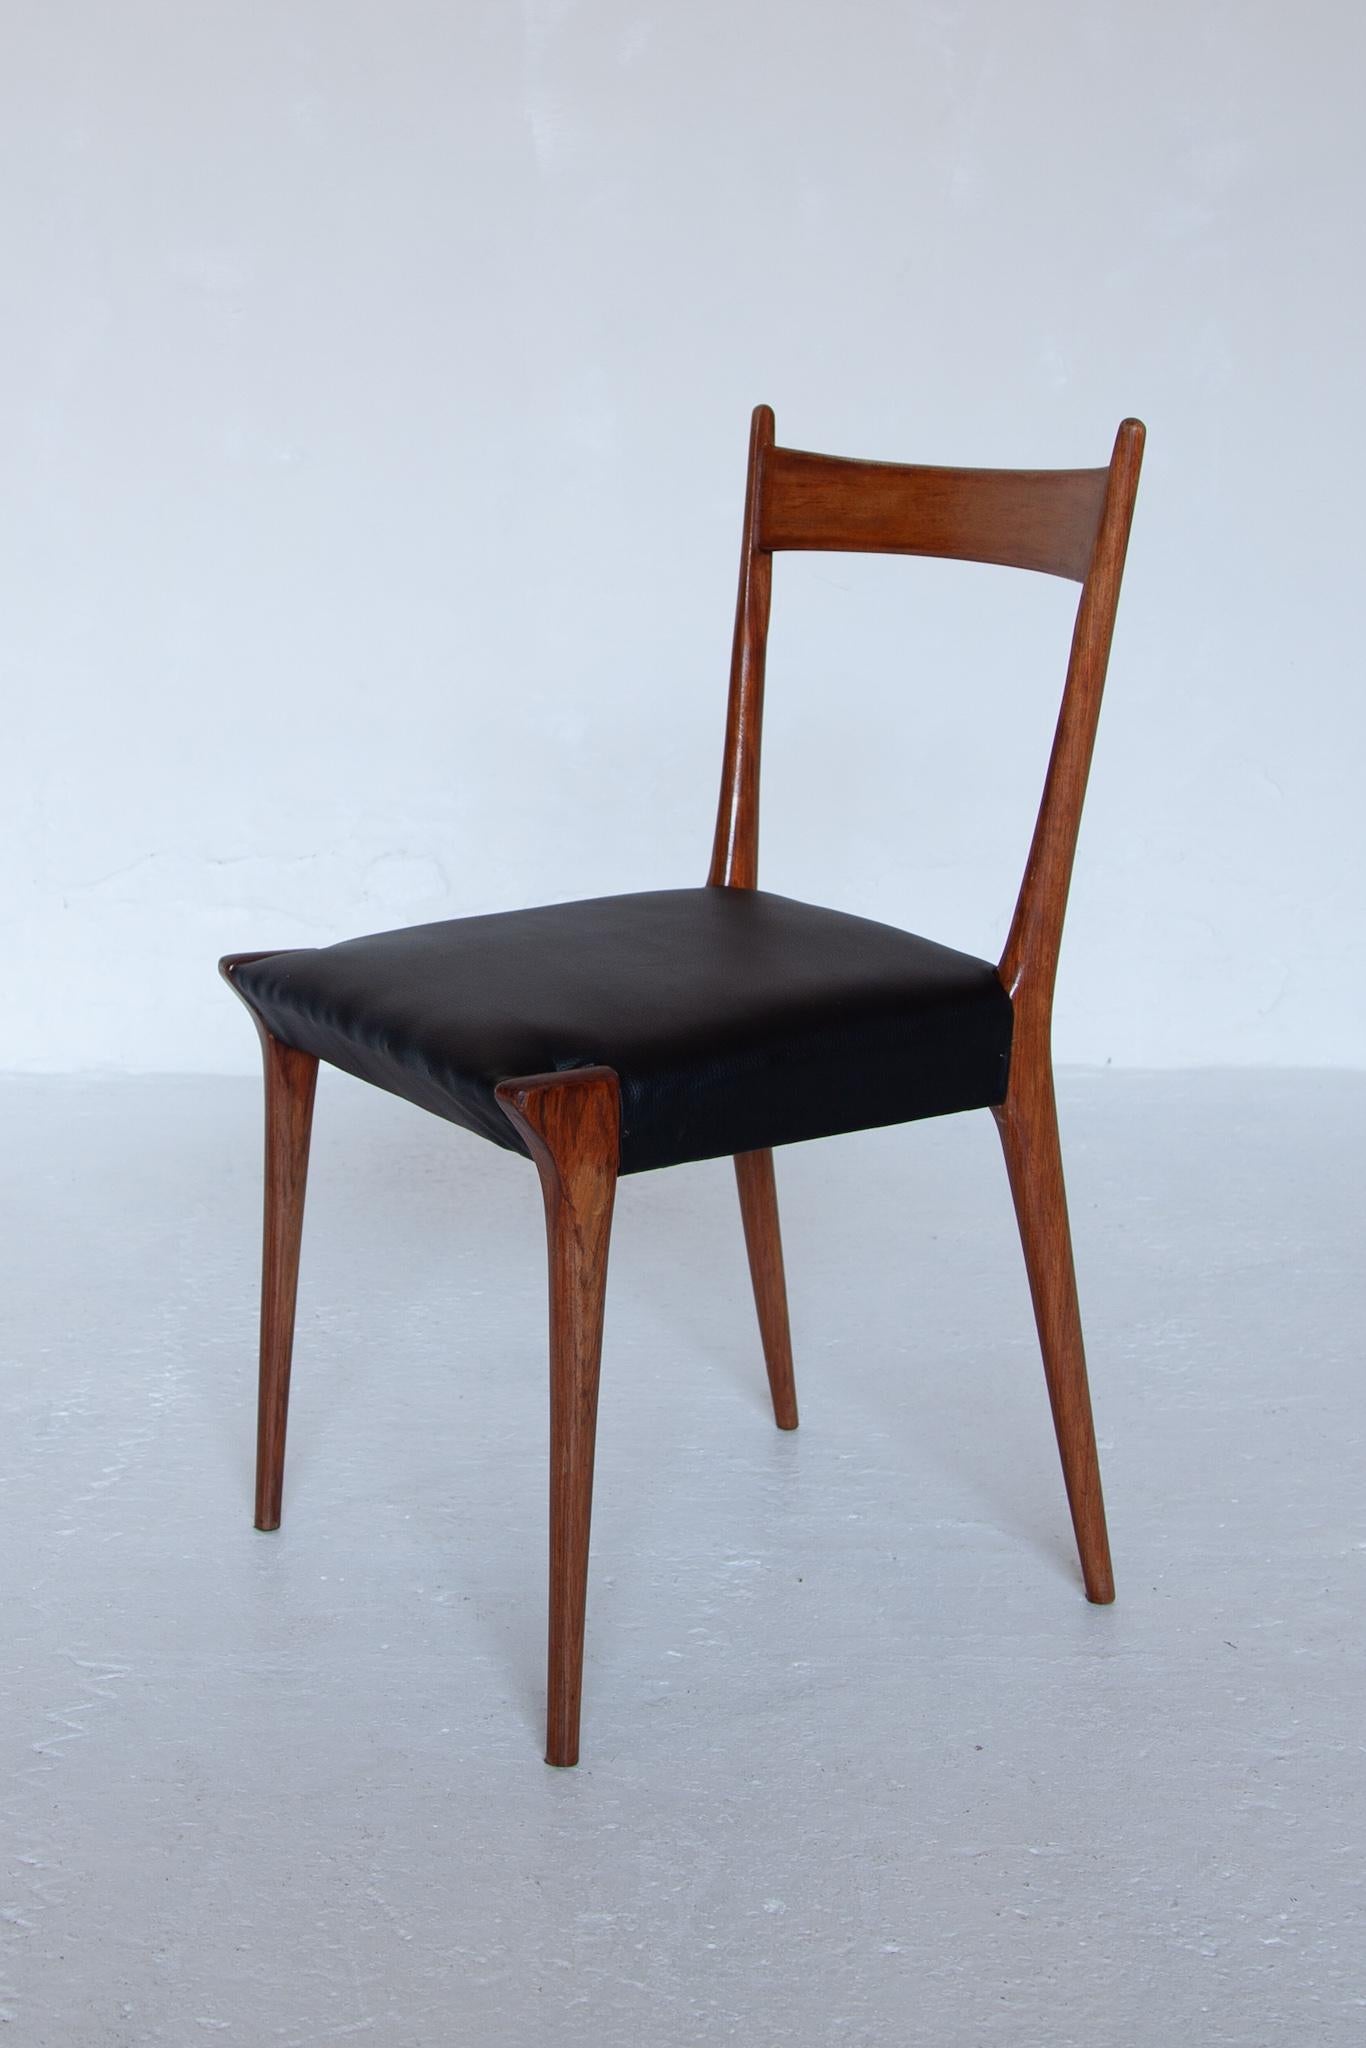 Belgian Set of Eight Dining Chairs 1958, Belgium for Belform designed by Alfred Hendrickx